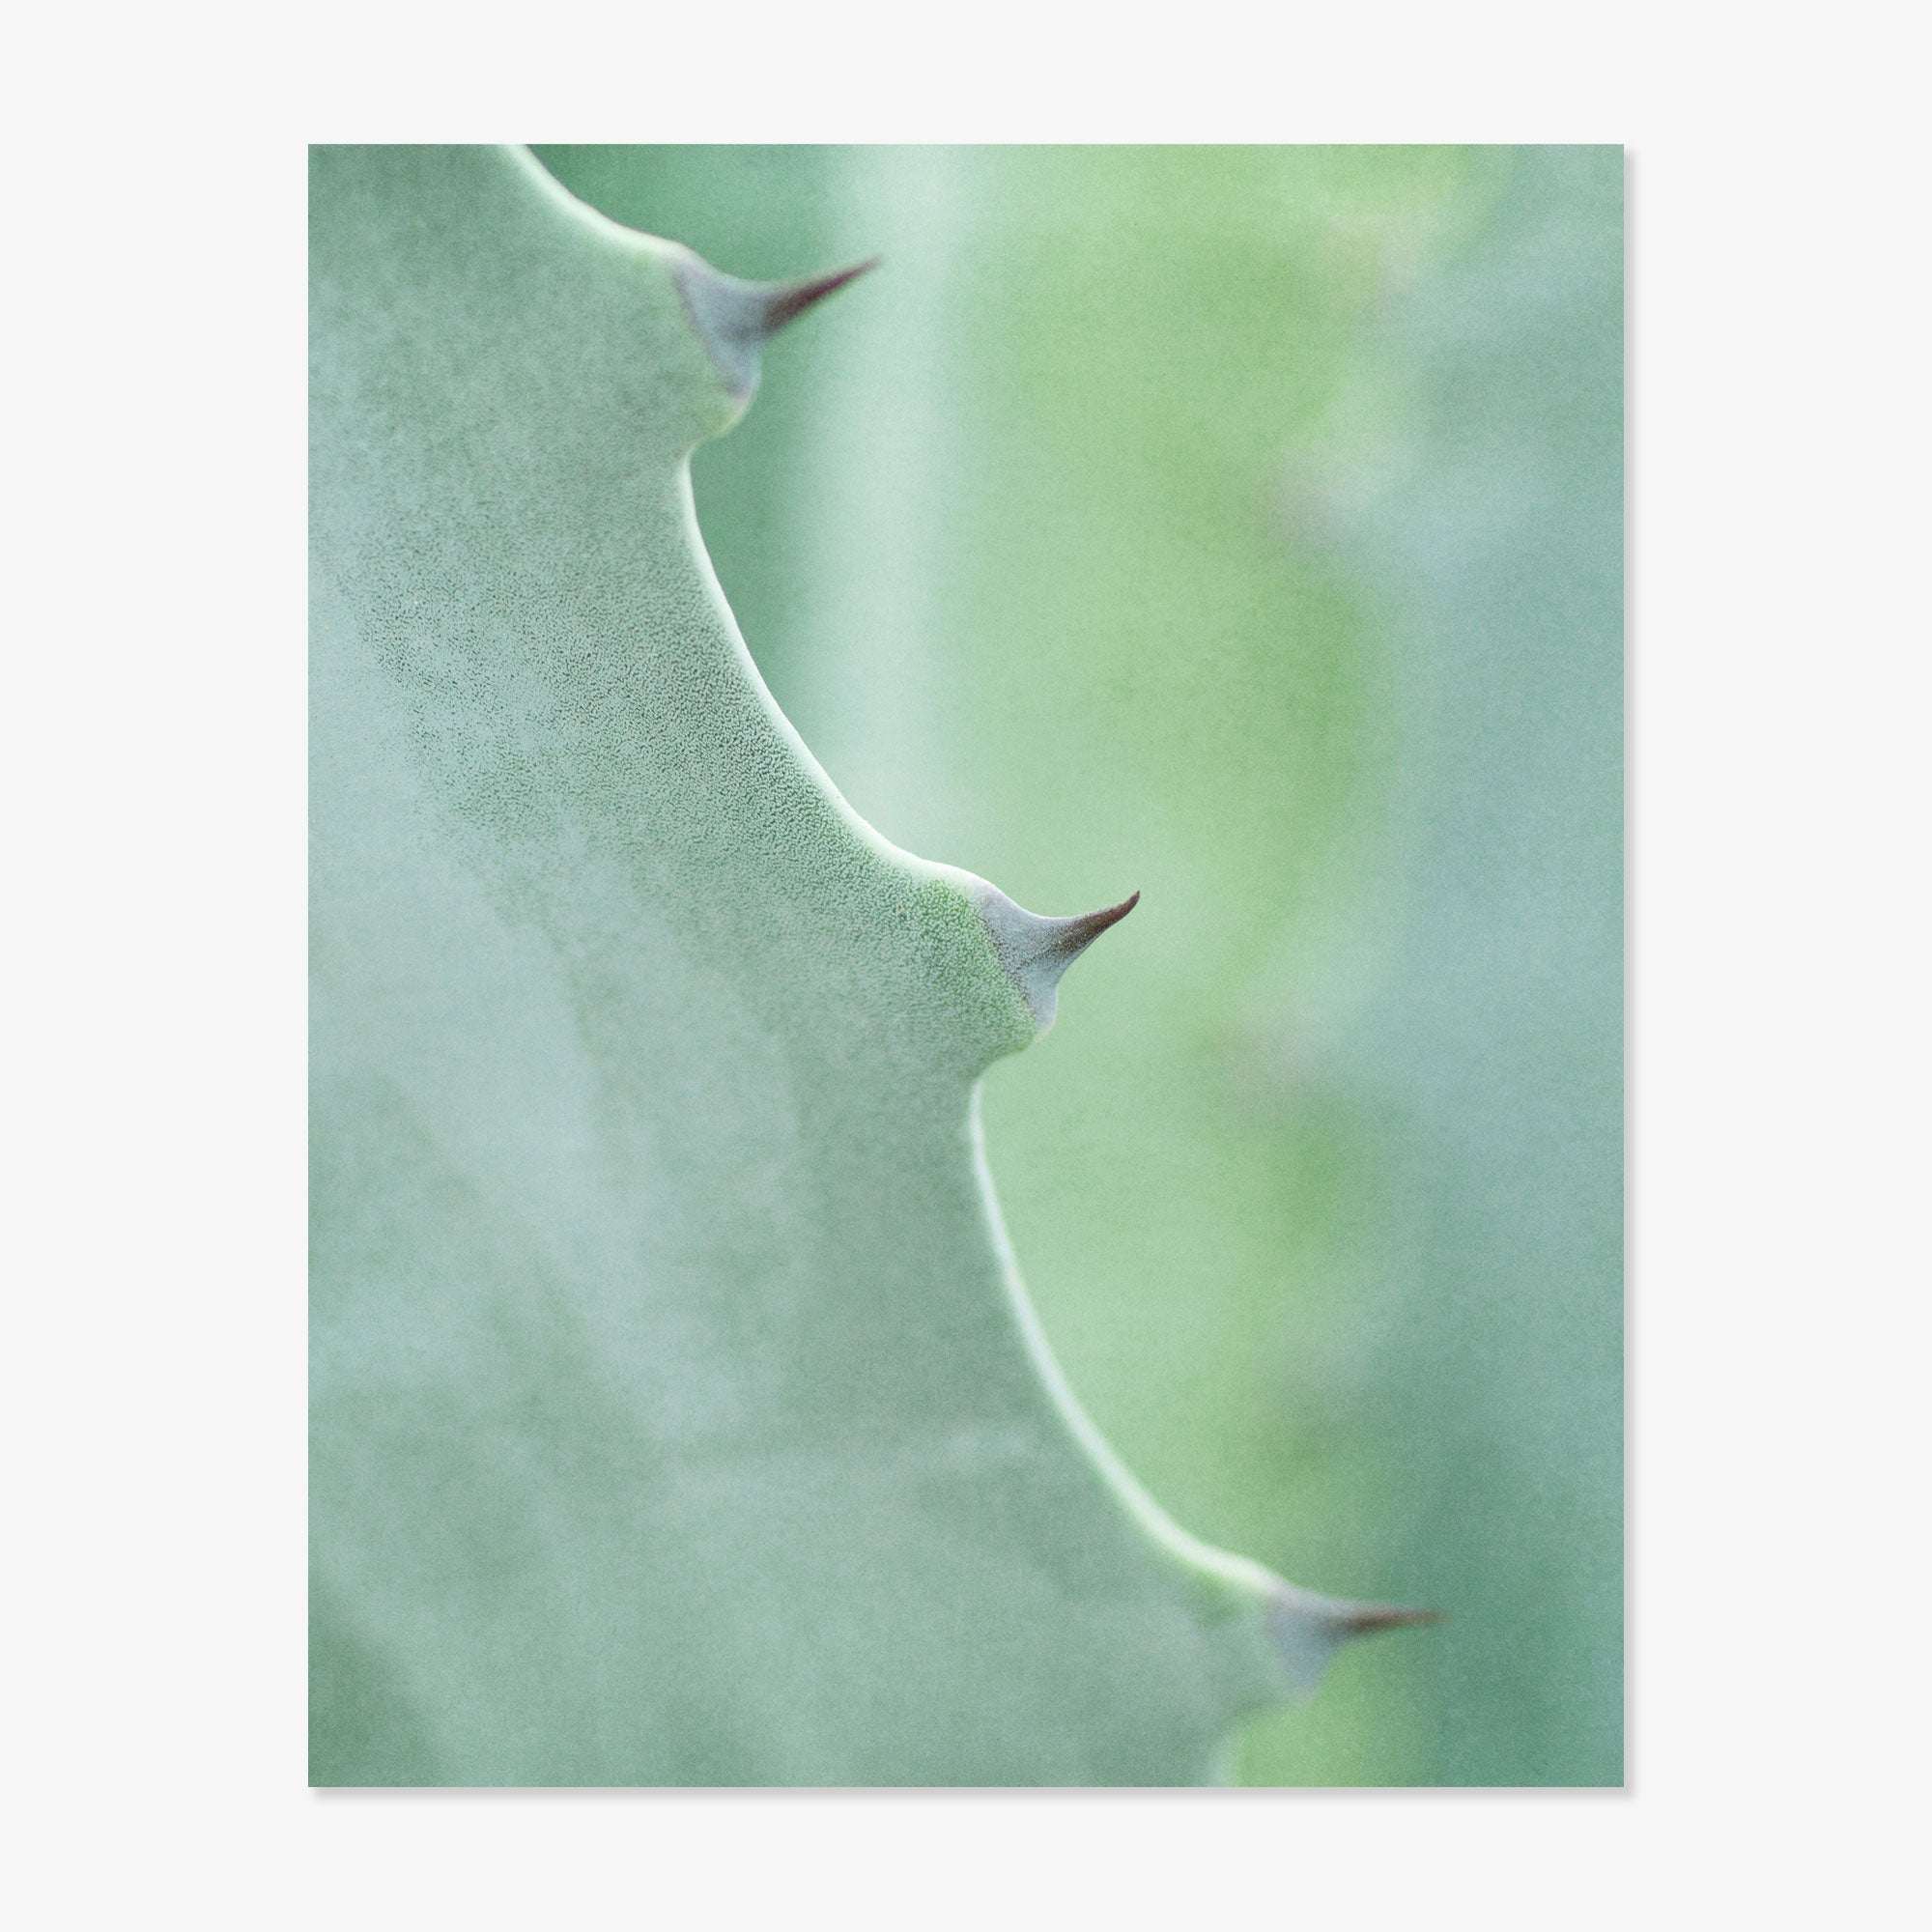 Close-up view of an Offley Green Aloe Vera Spikes II print showing the spiky edges and detailed textures of the plant&#39;s surface, with a soft green blurred background.